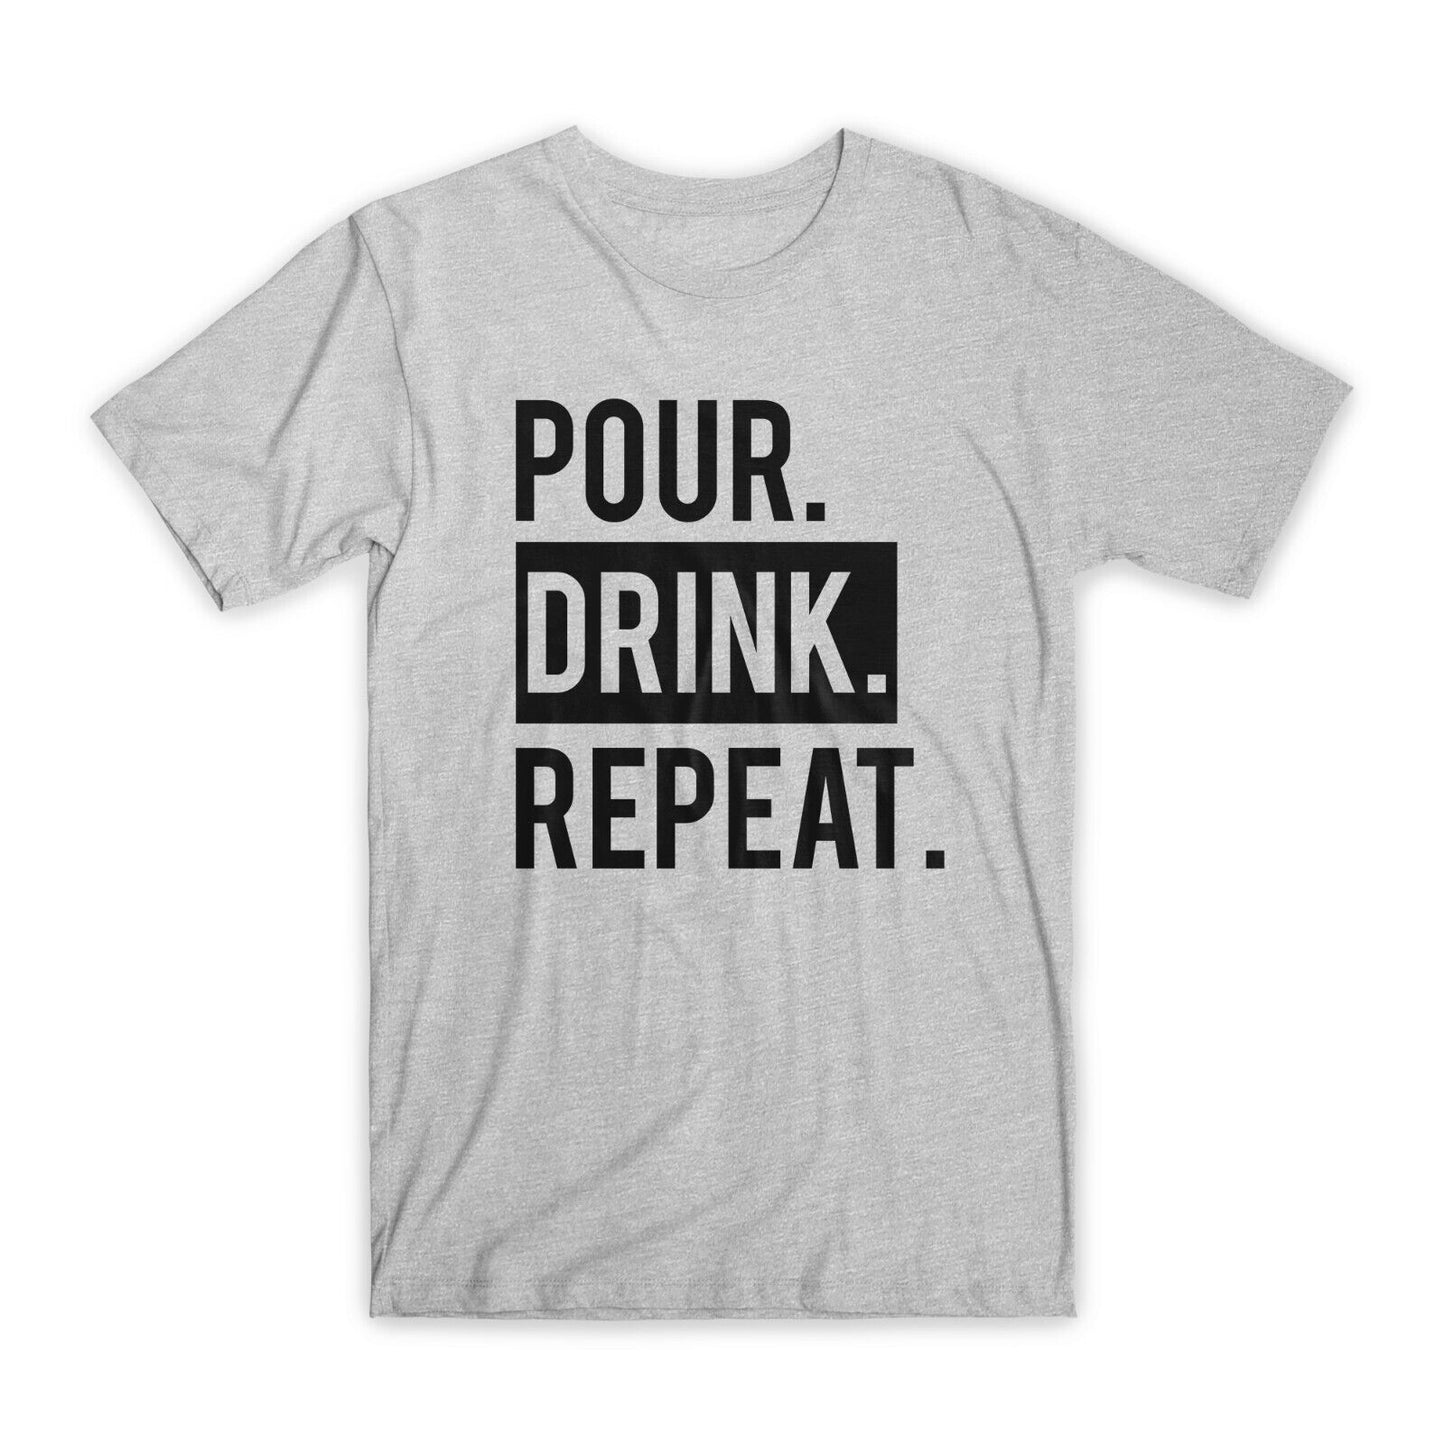 Pour Drink Repeat T-Shirt Premium Soft Cotton Crew Neck Funny Tees Gifts NEW